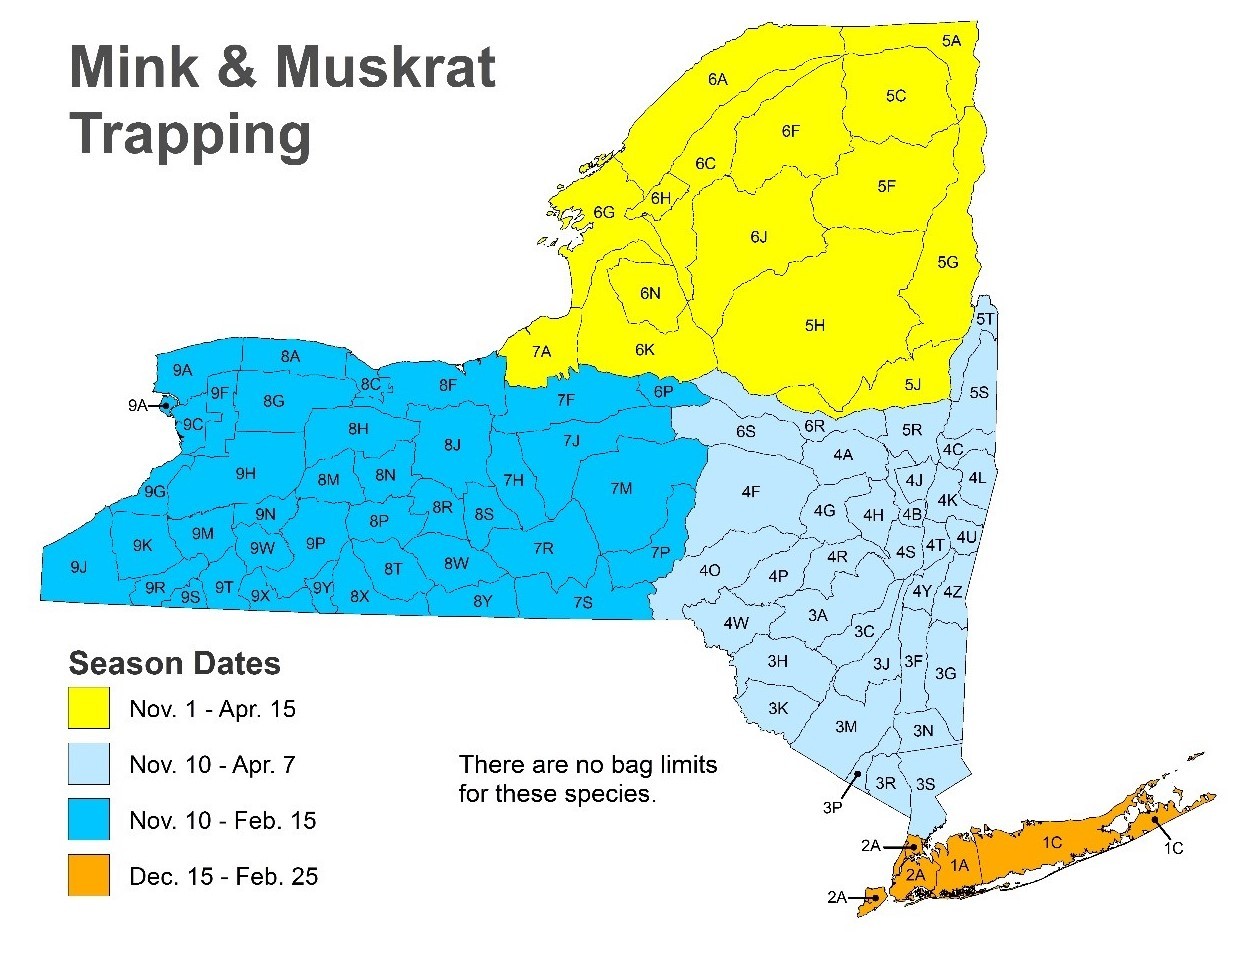 map of mink and muskrat trapping dates in NY